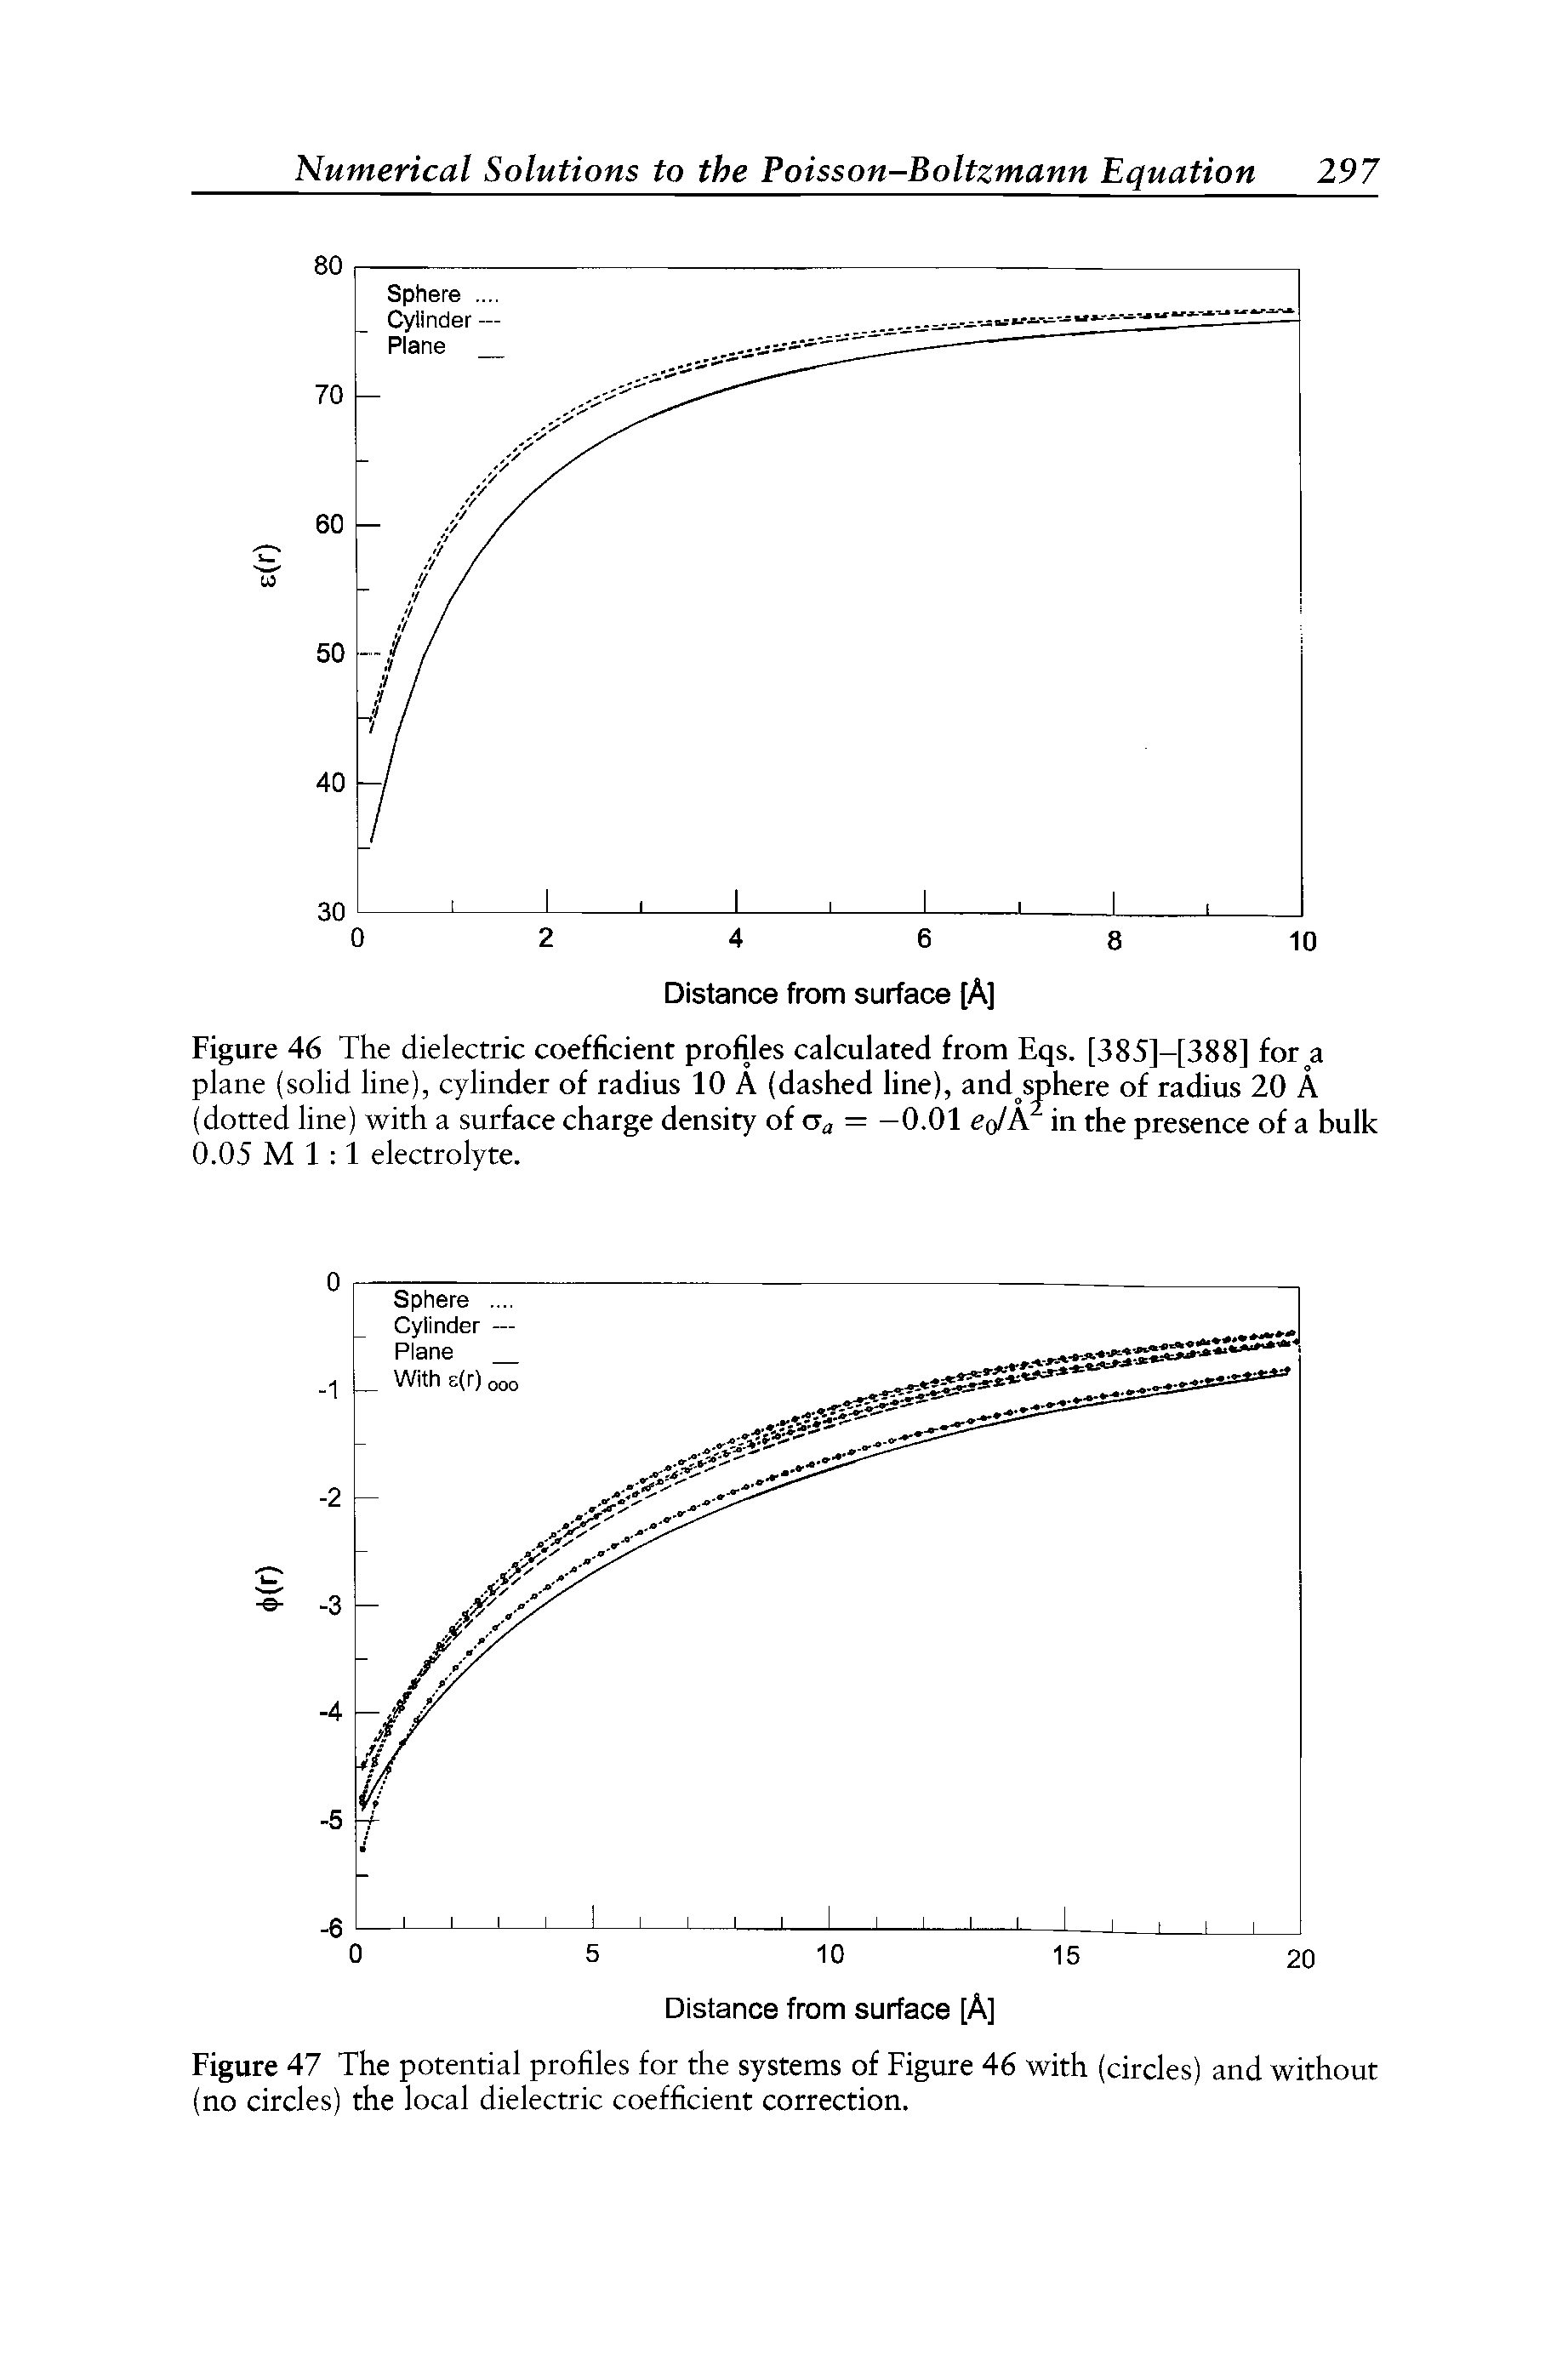 Figure 47 The potential profiles for the systems of Figure 46 with (circles) and without (no circles) the local dielectric coefficient correction.